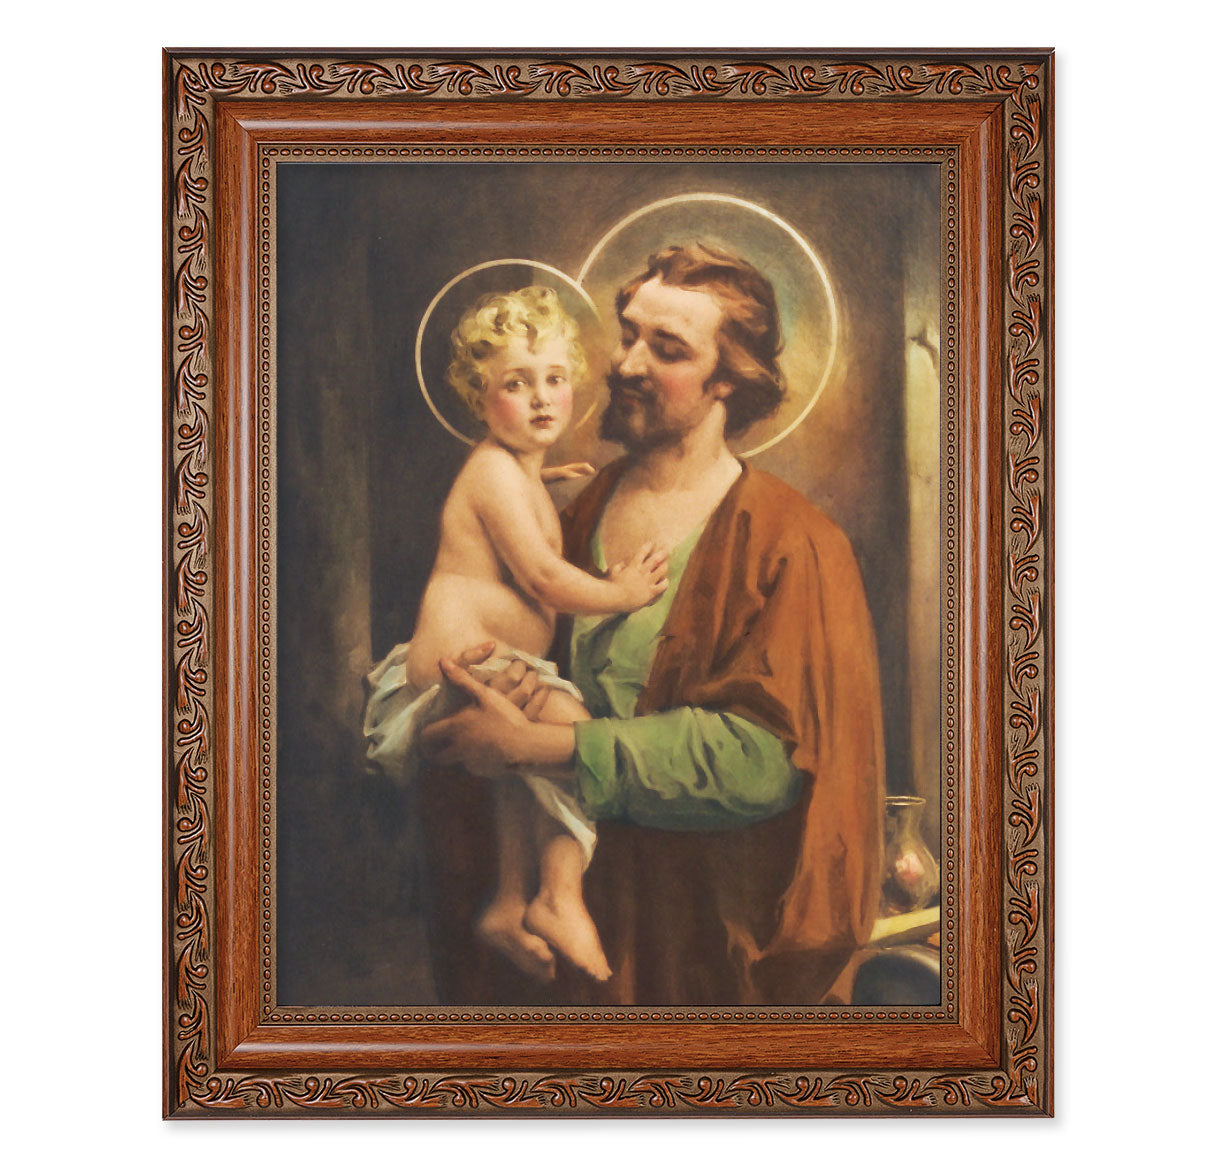 St. Joseph with Jesus Picture Framed Wall Art Decor Large, Antiqued Dark Mahogany Finish Frame with Acanthus-Leaf Detailing